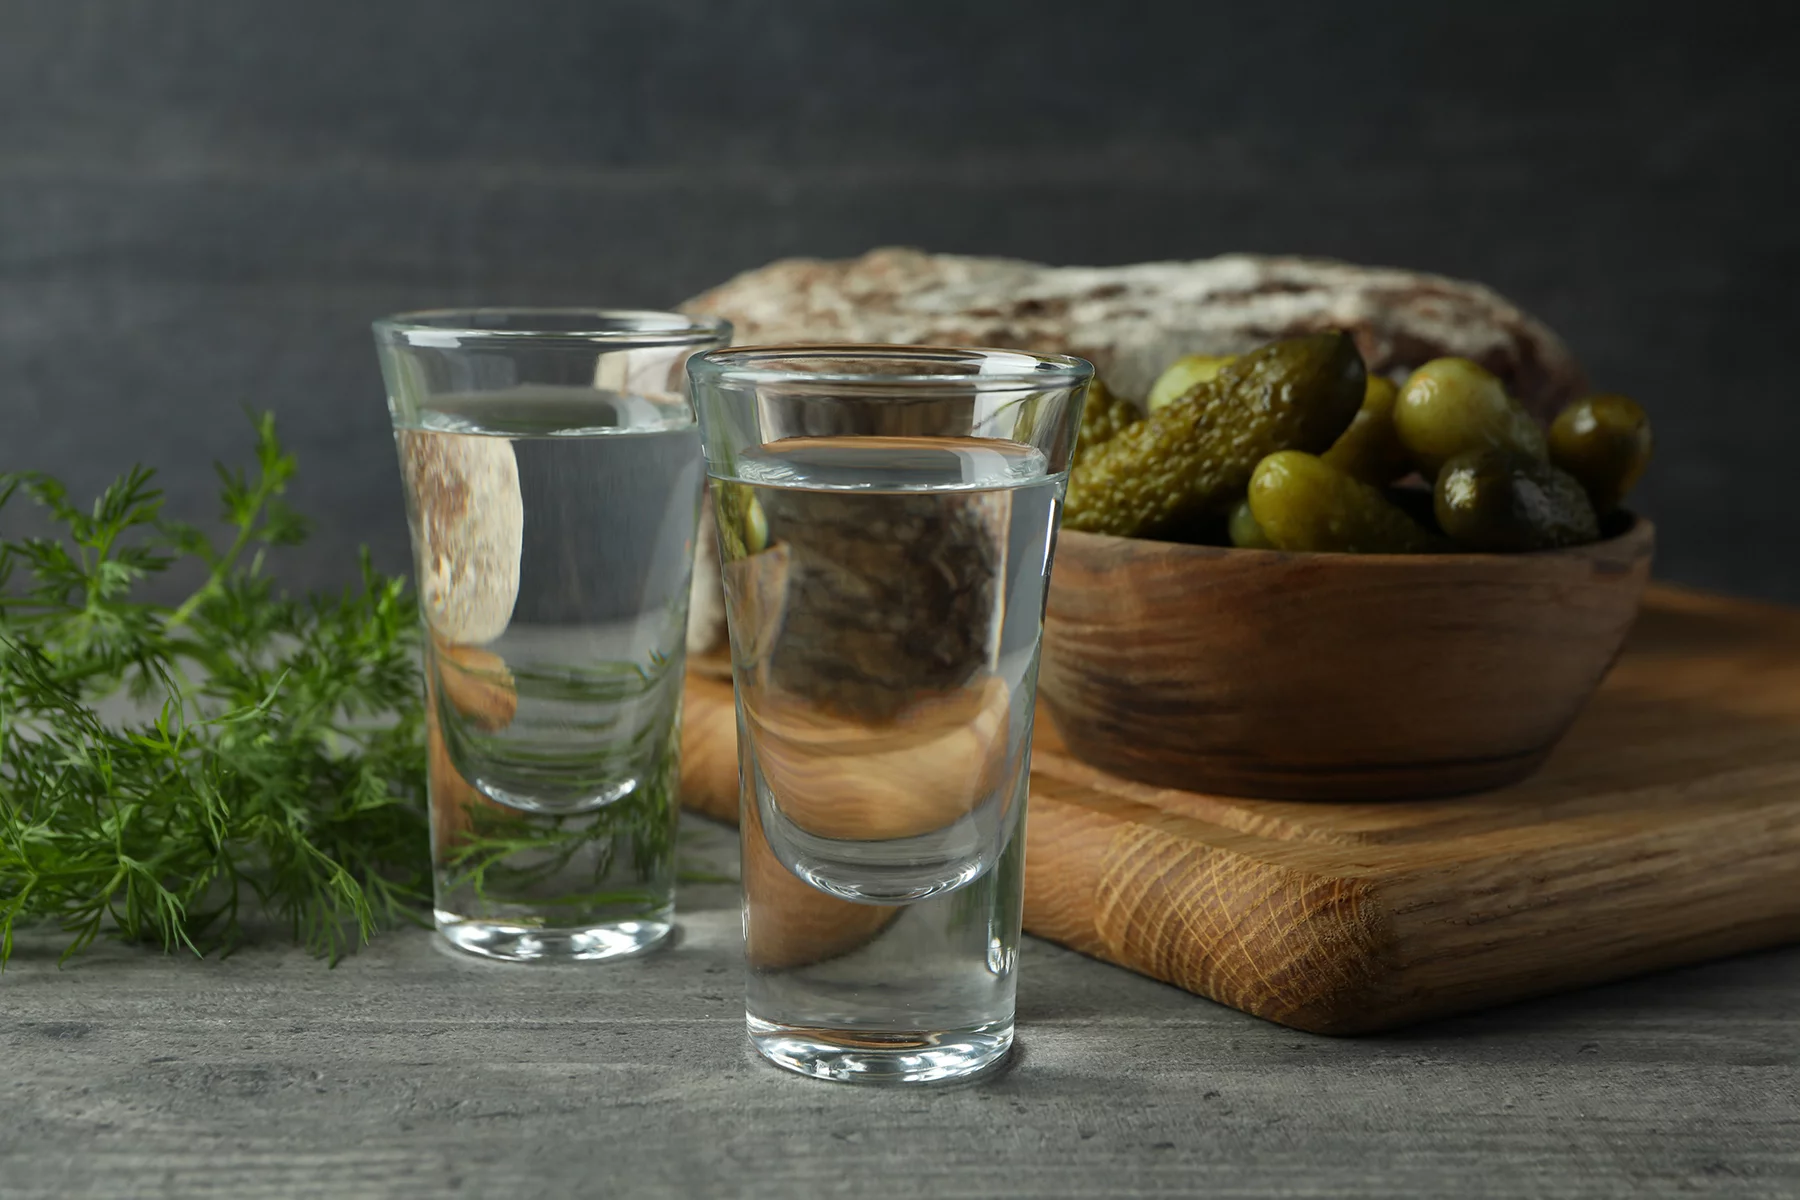 Vodka with pickles, bread, and dill